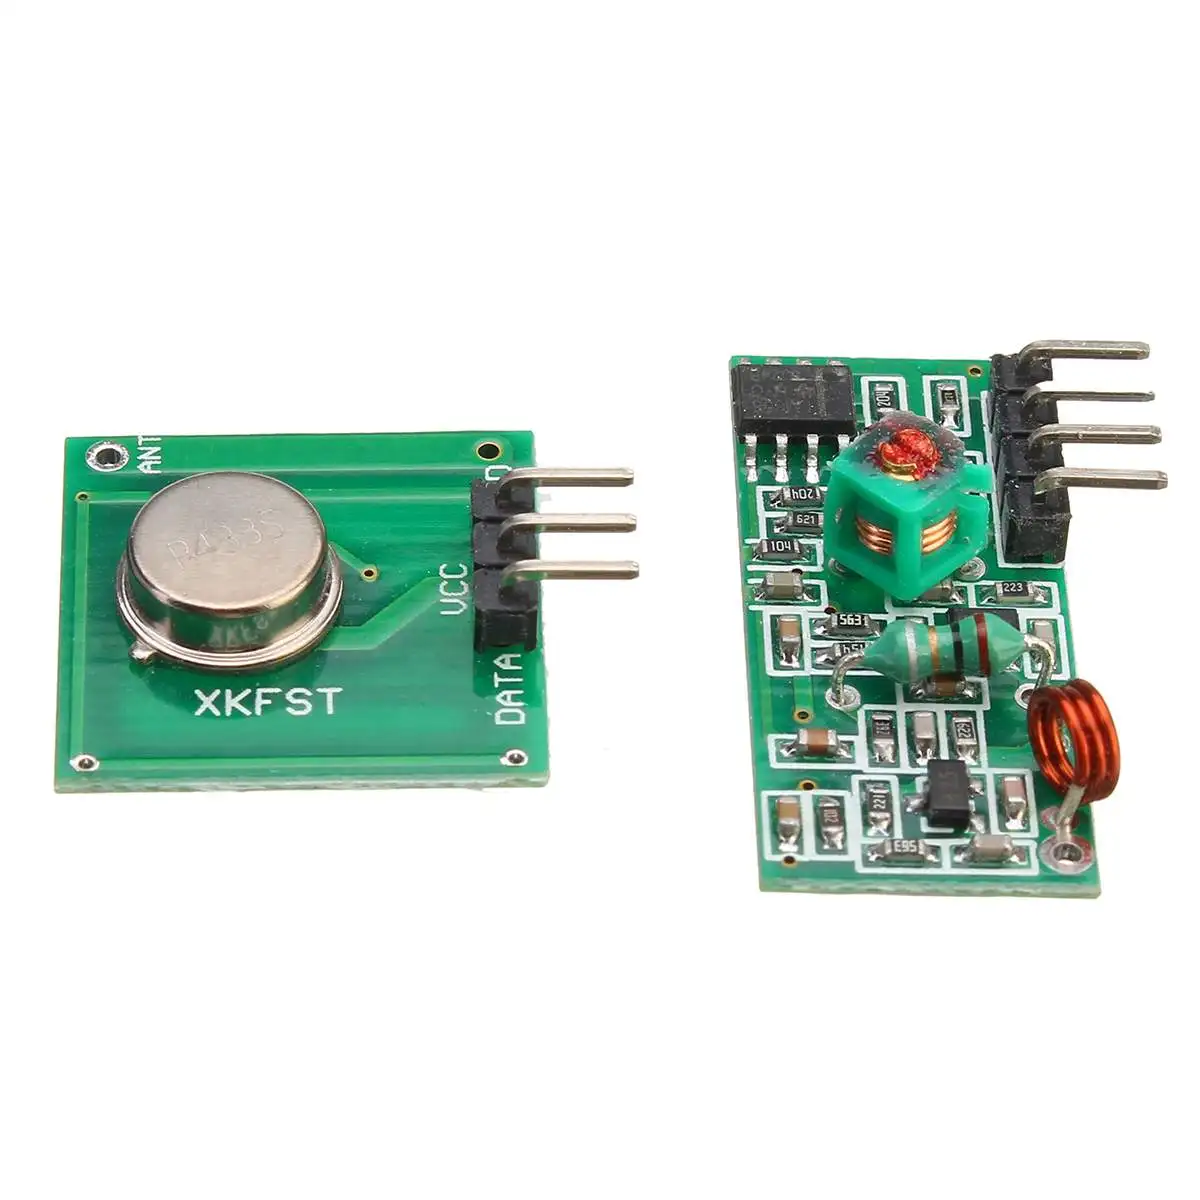 LEORY 433Mhz RF Decoder Transmitter With Receiver Module Kit For Arduino ARM MCU Wireless